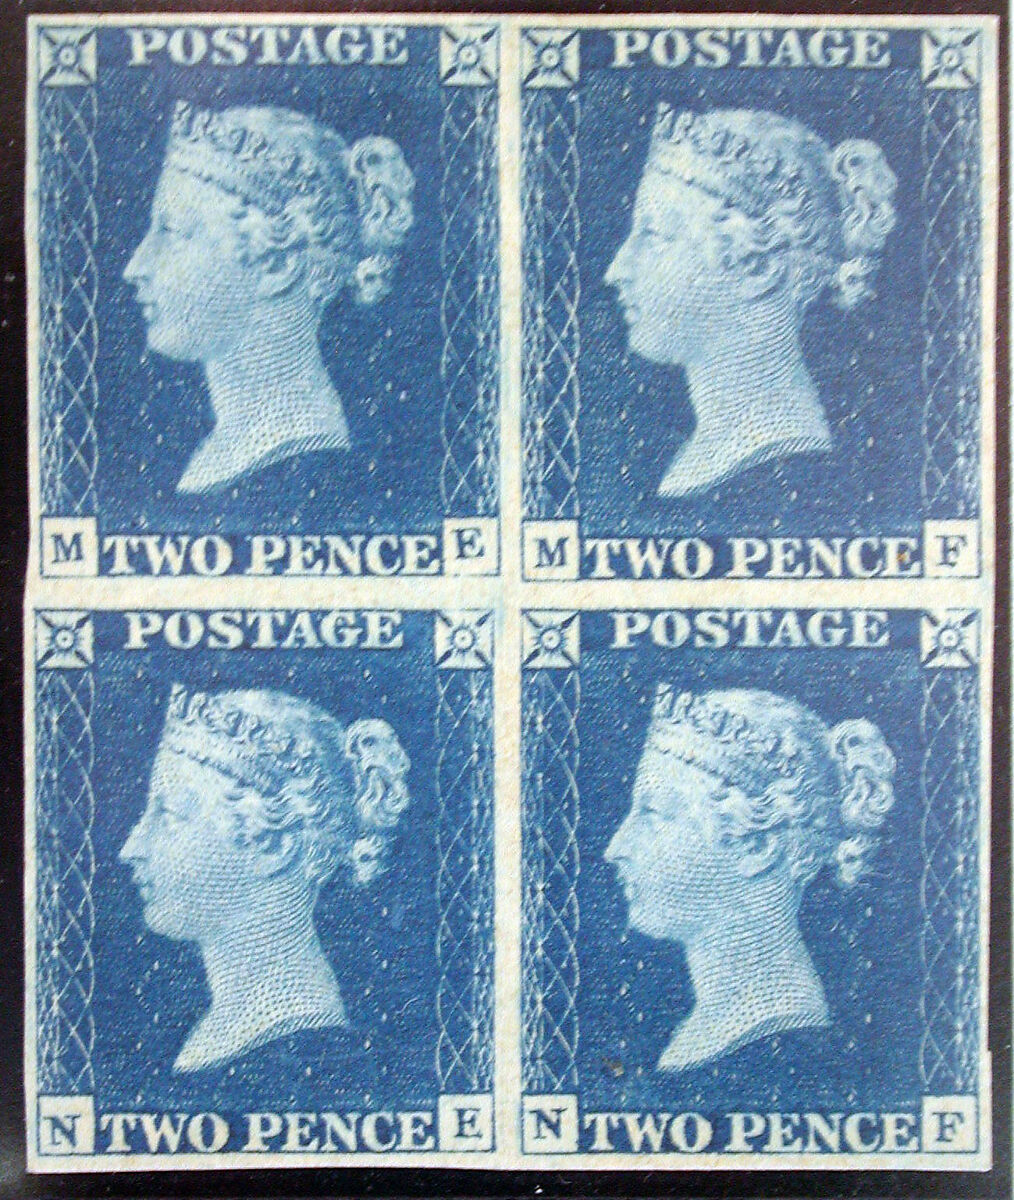 Unused block of four "Two Penny Blue" postage stamps of Queen Victoria, After a design by William Wyon (British, Birmingham 1795–1851 Brighton), Engraving printed in blue ink on paper, British 